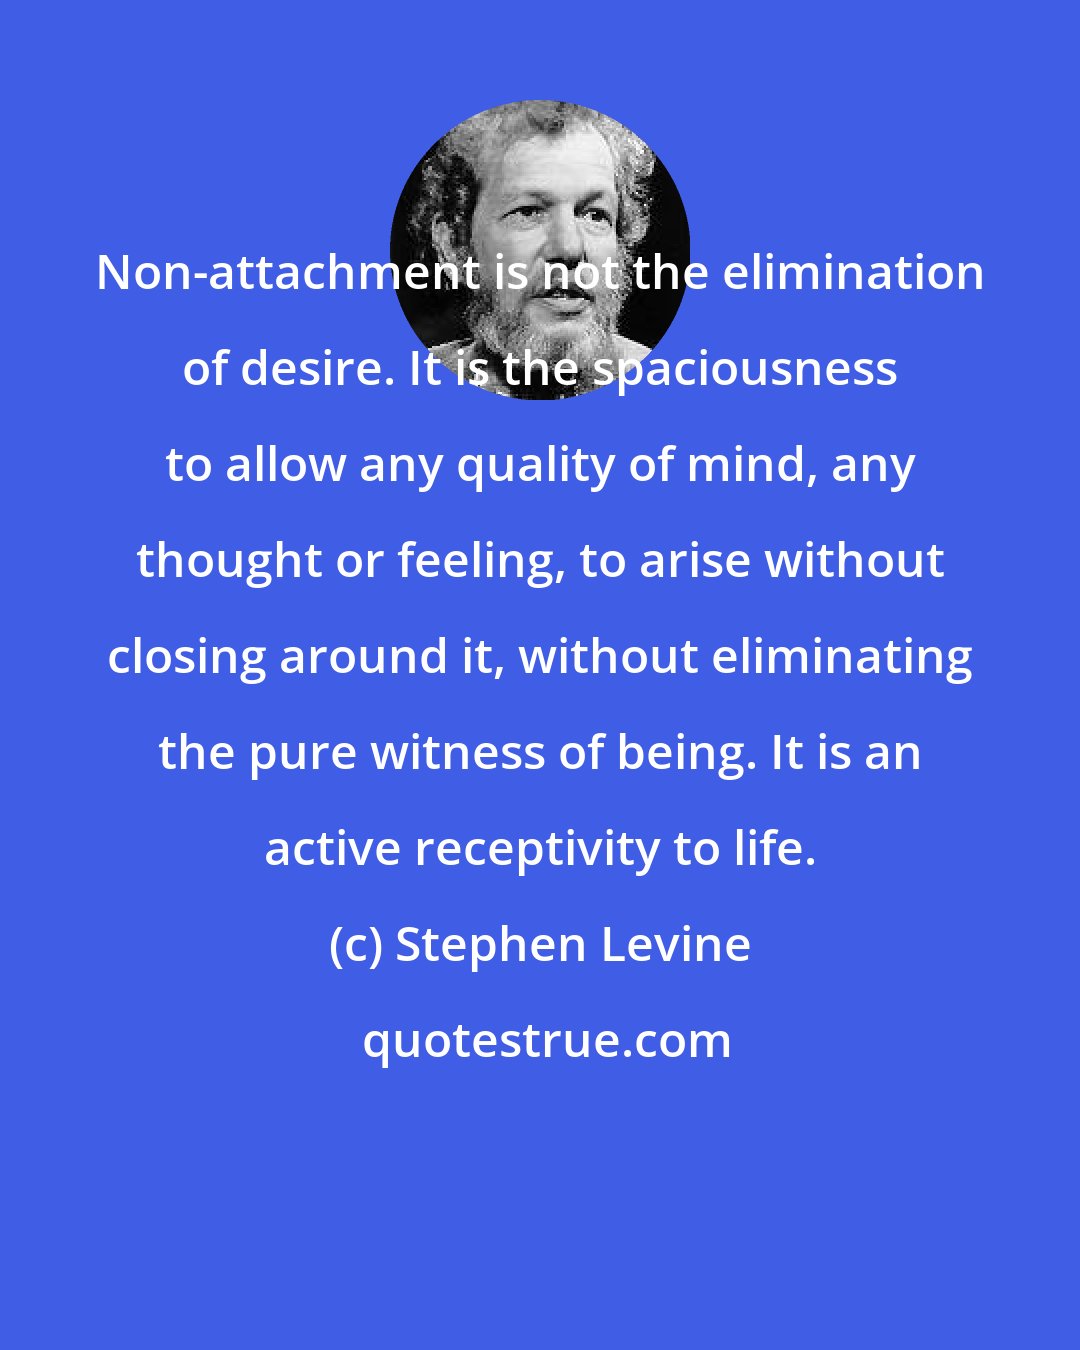 Stephen Levine: Non-attachment is not the elimination of desire. It is the spaciousness to allow any quality of mind, any thought or feeling, to arise without closing around it, without eliminating the pure witness of being. It is an active receptivity to life.